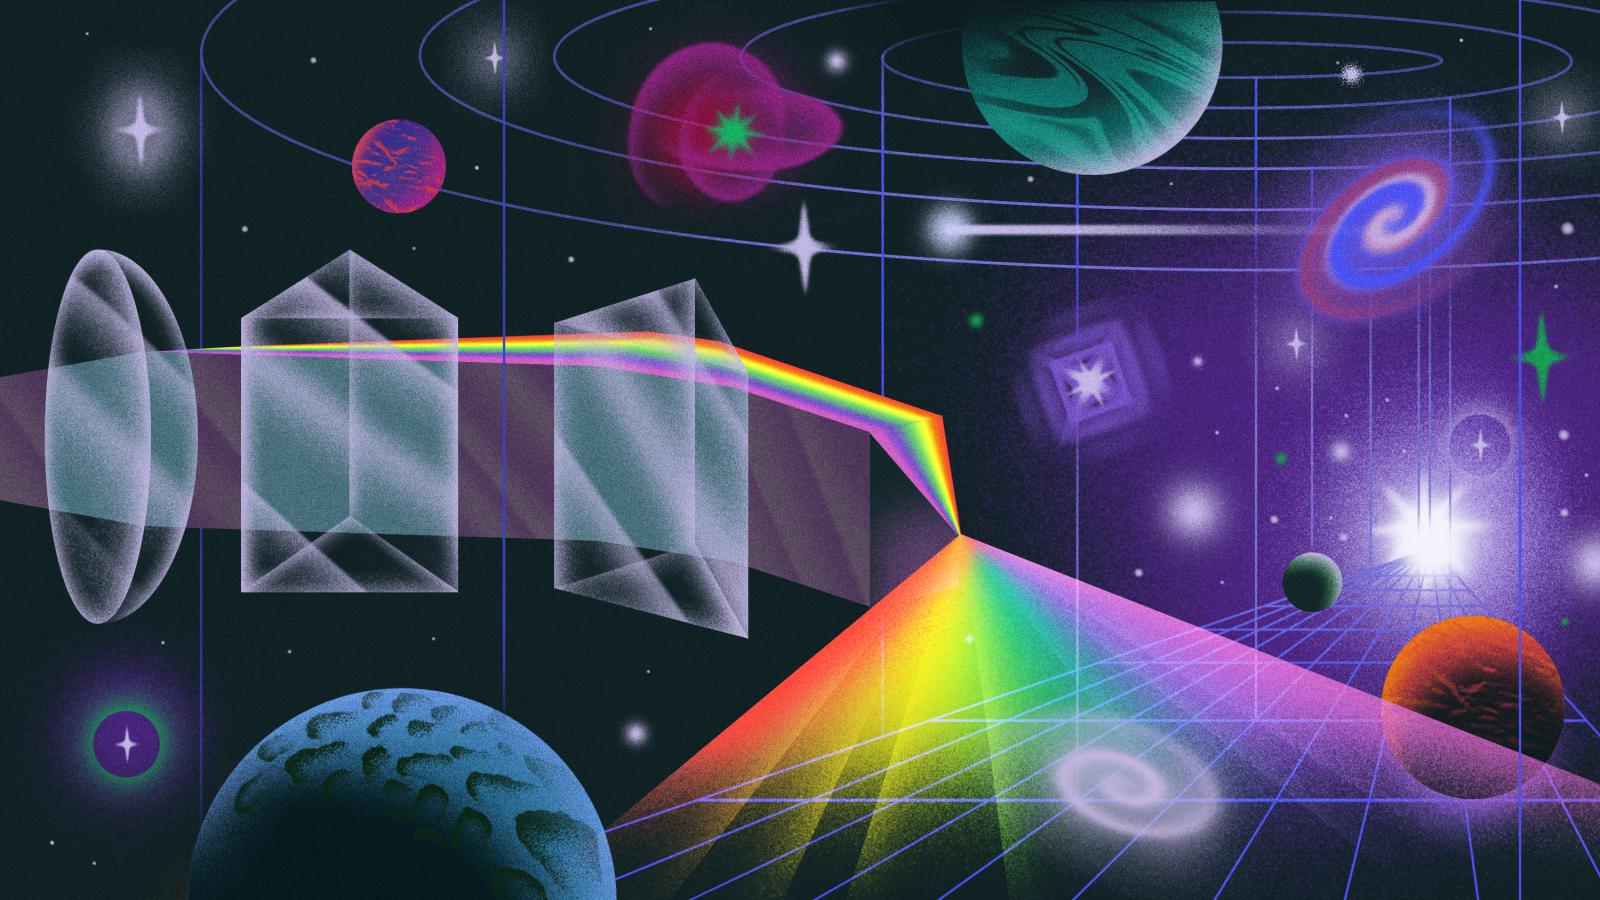 Illustration showing light diffracted into a rainbow of colors in space